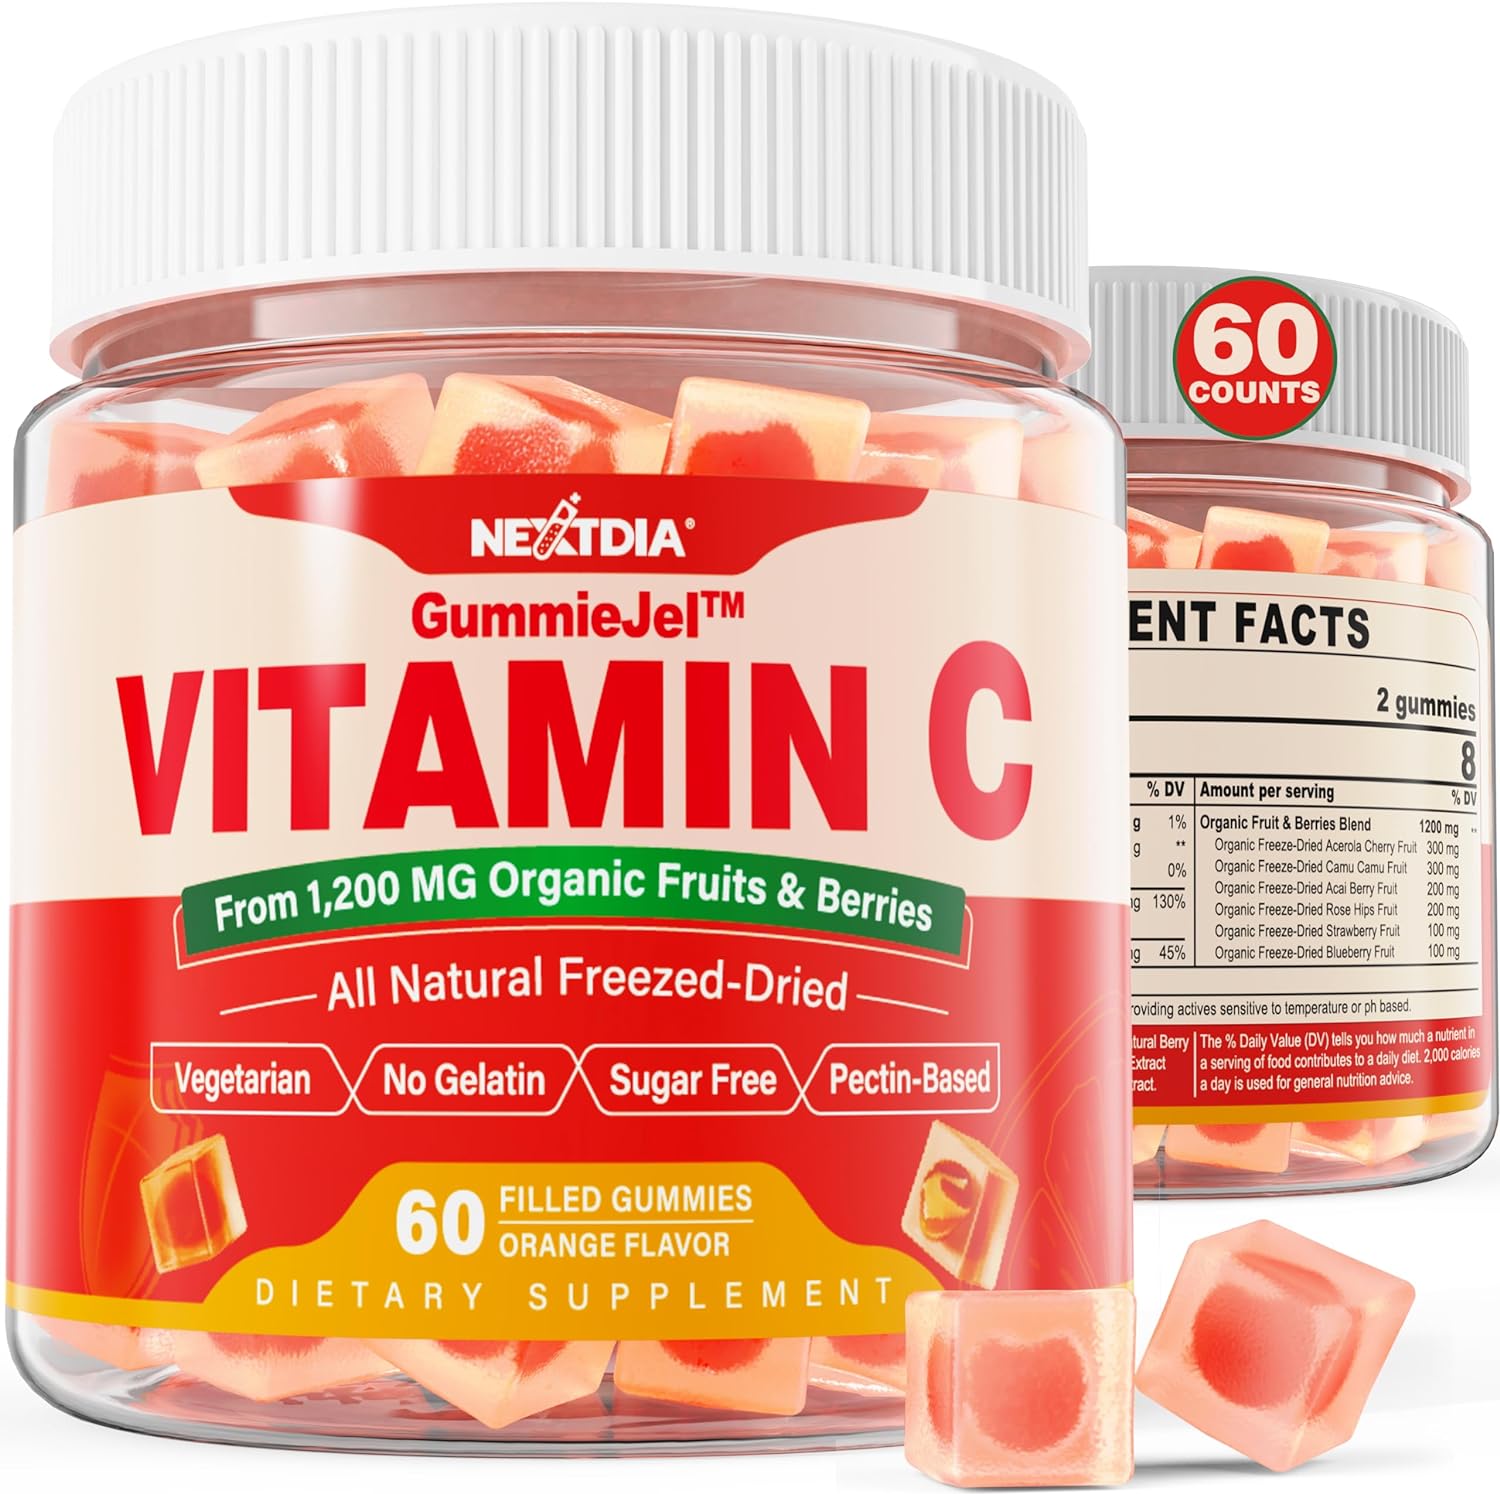 Whole Food Vitamin C Gummies for Adults & Kids, 10X Higher Absorption than Synthetic Vitamin C, 100% Natural, Raw Vitamin C Supplement for Immune & Collagen Support, Sugar Free, Orange Flavor, 60 Cts